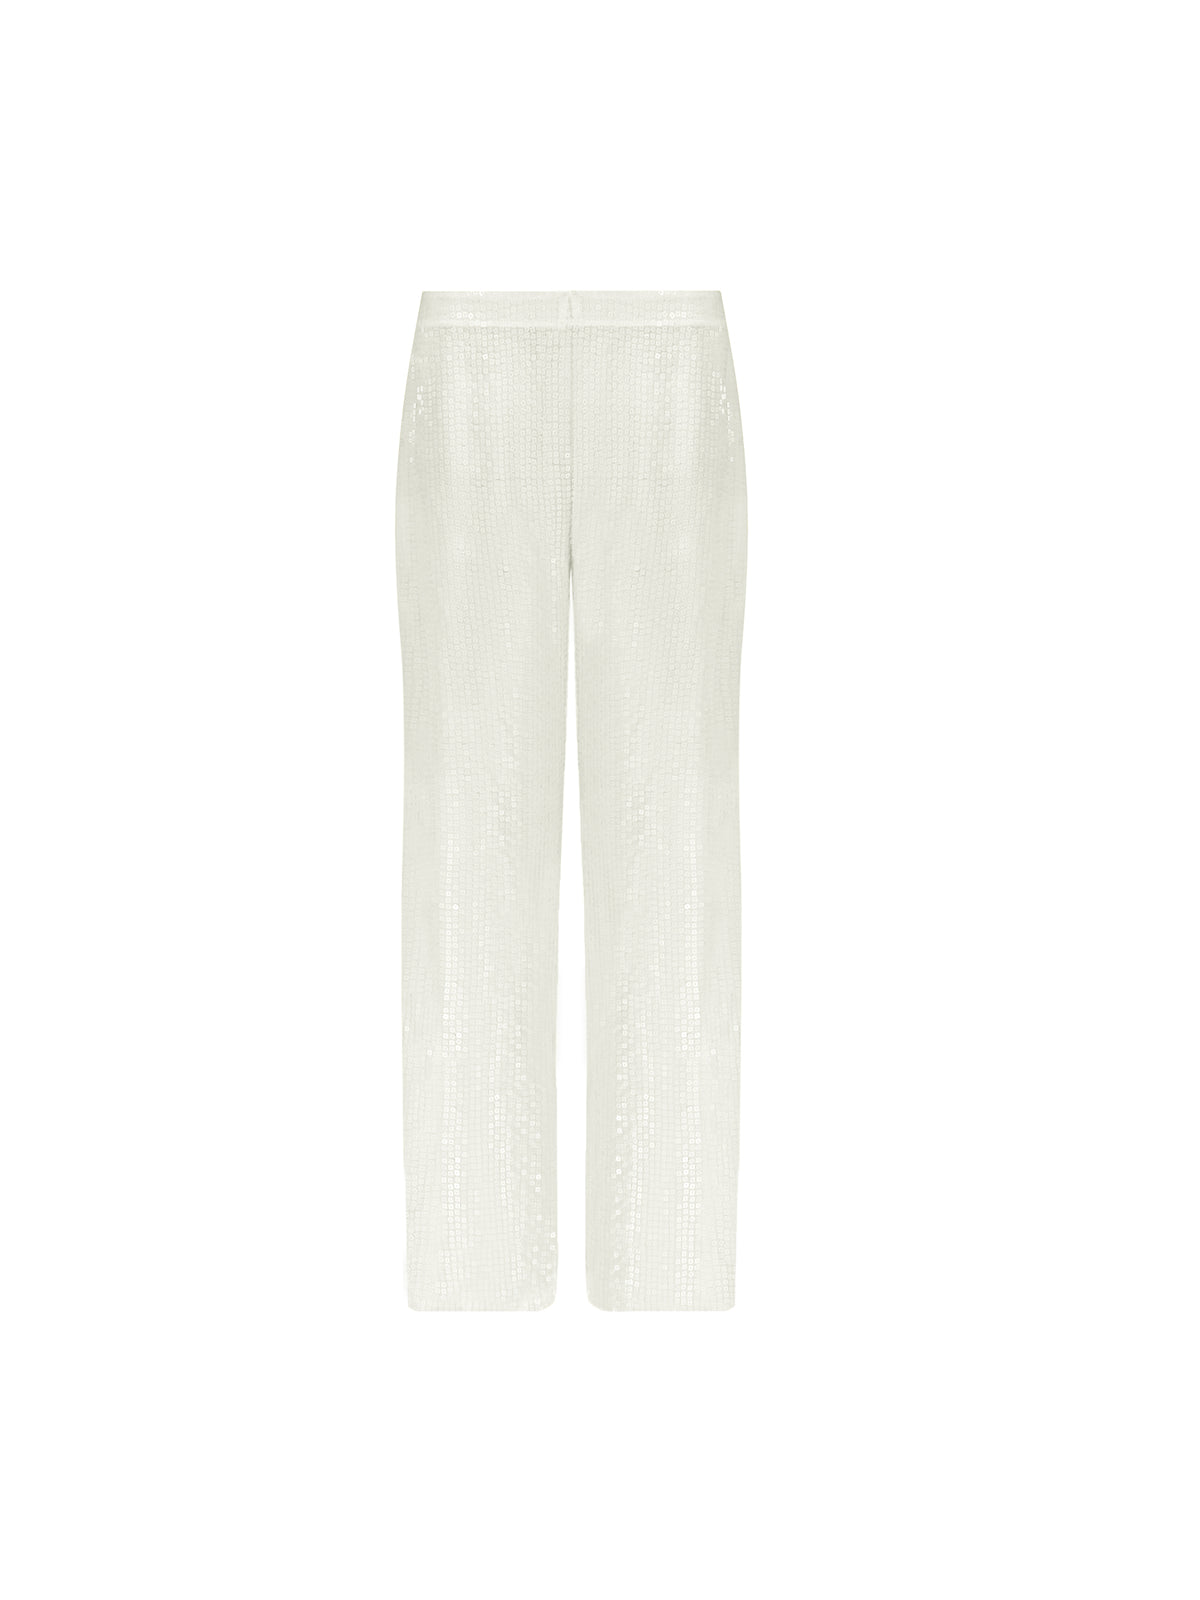 Ivory Sequin Trousers